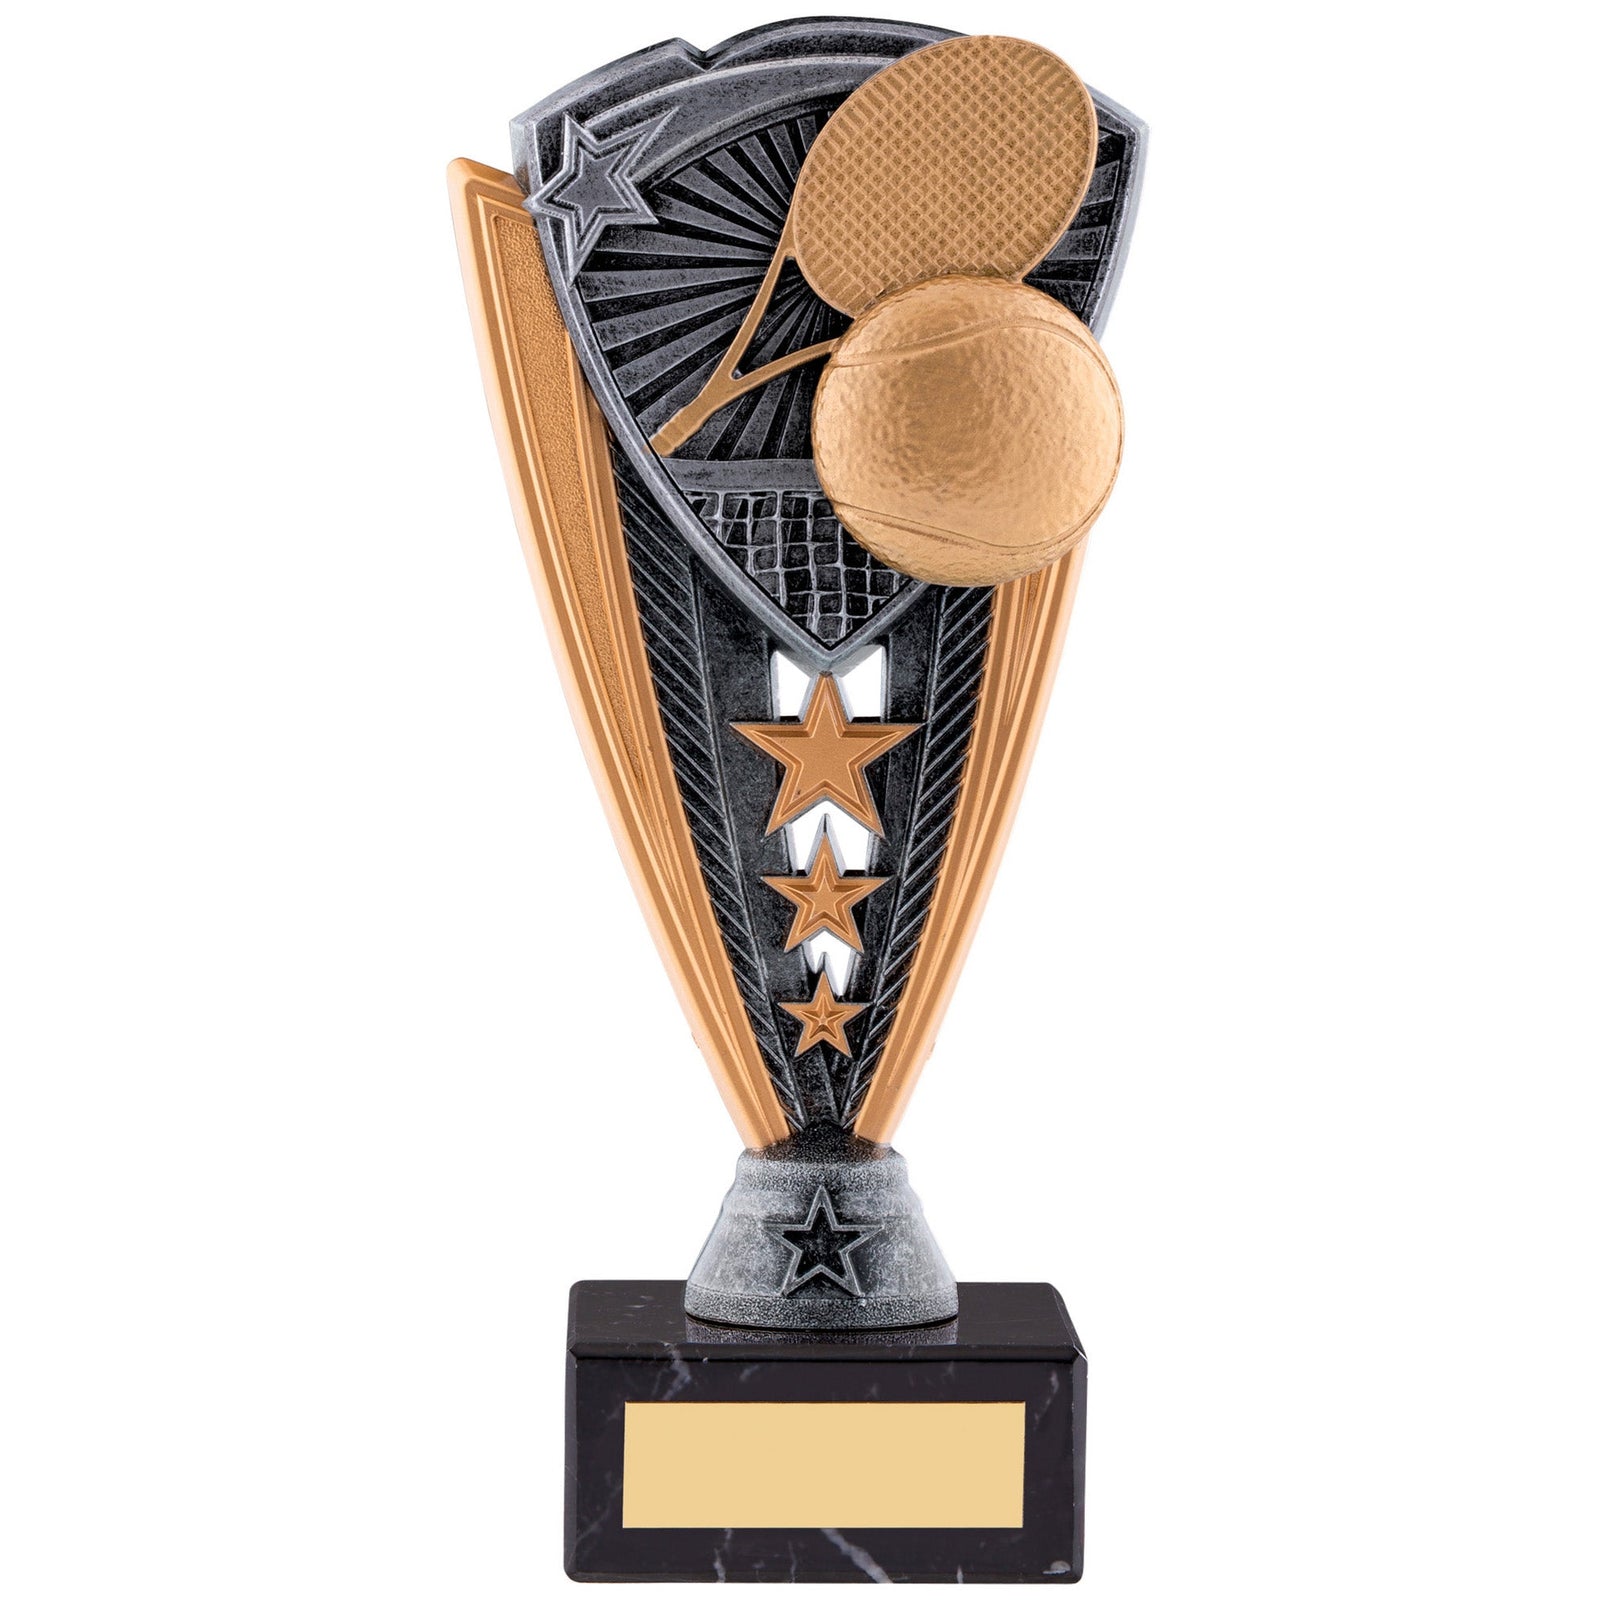 Tennis Utopia Award with Engraved Plaque on Marble Base